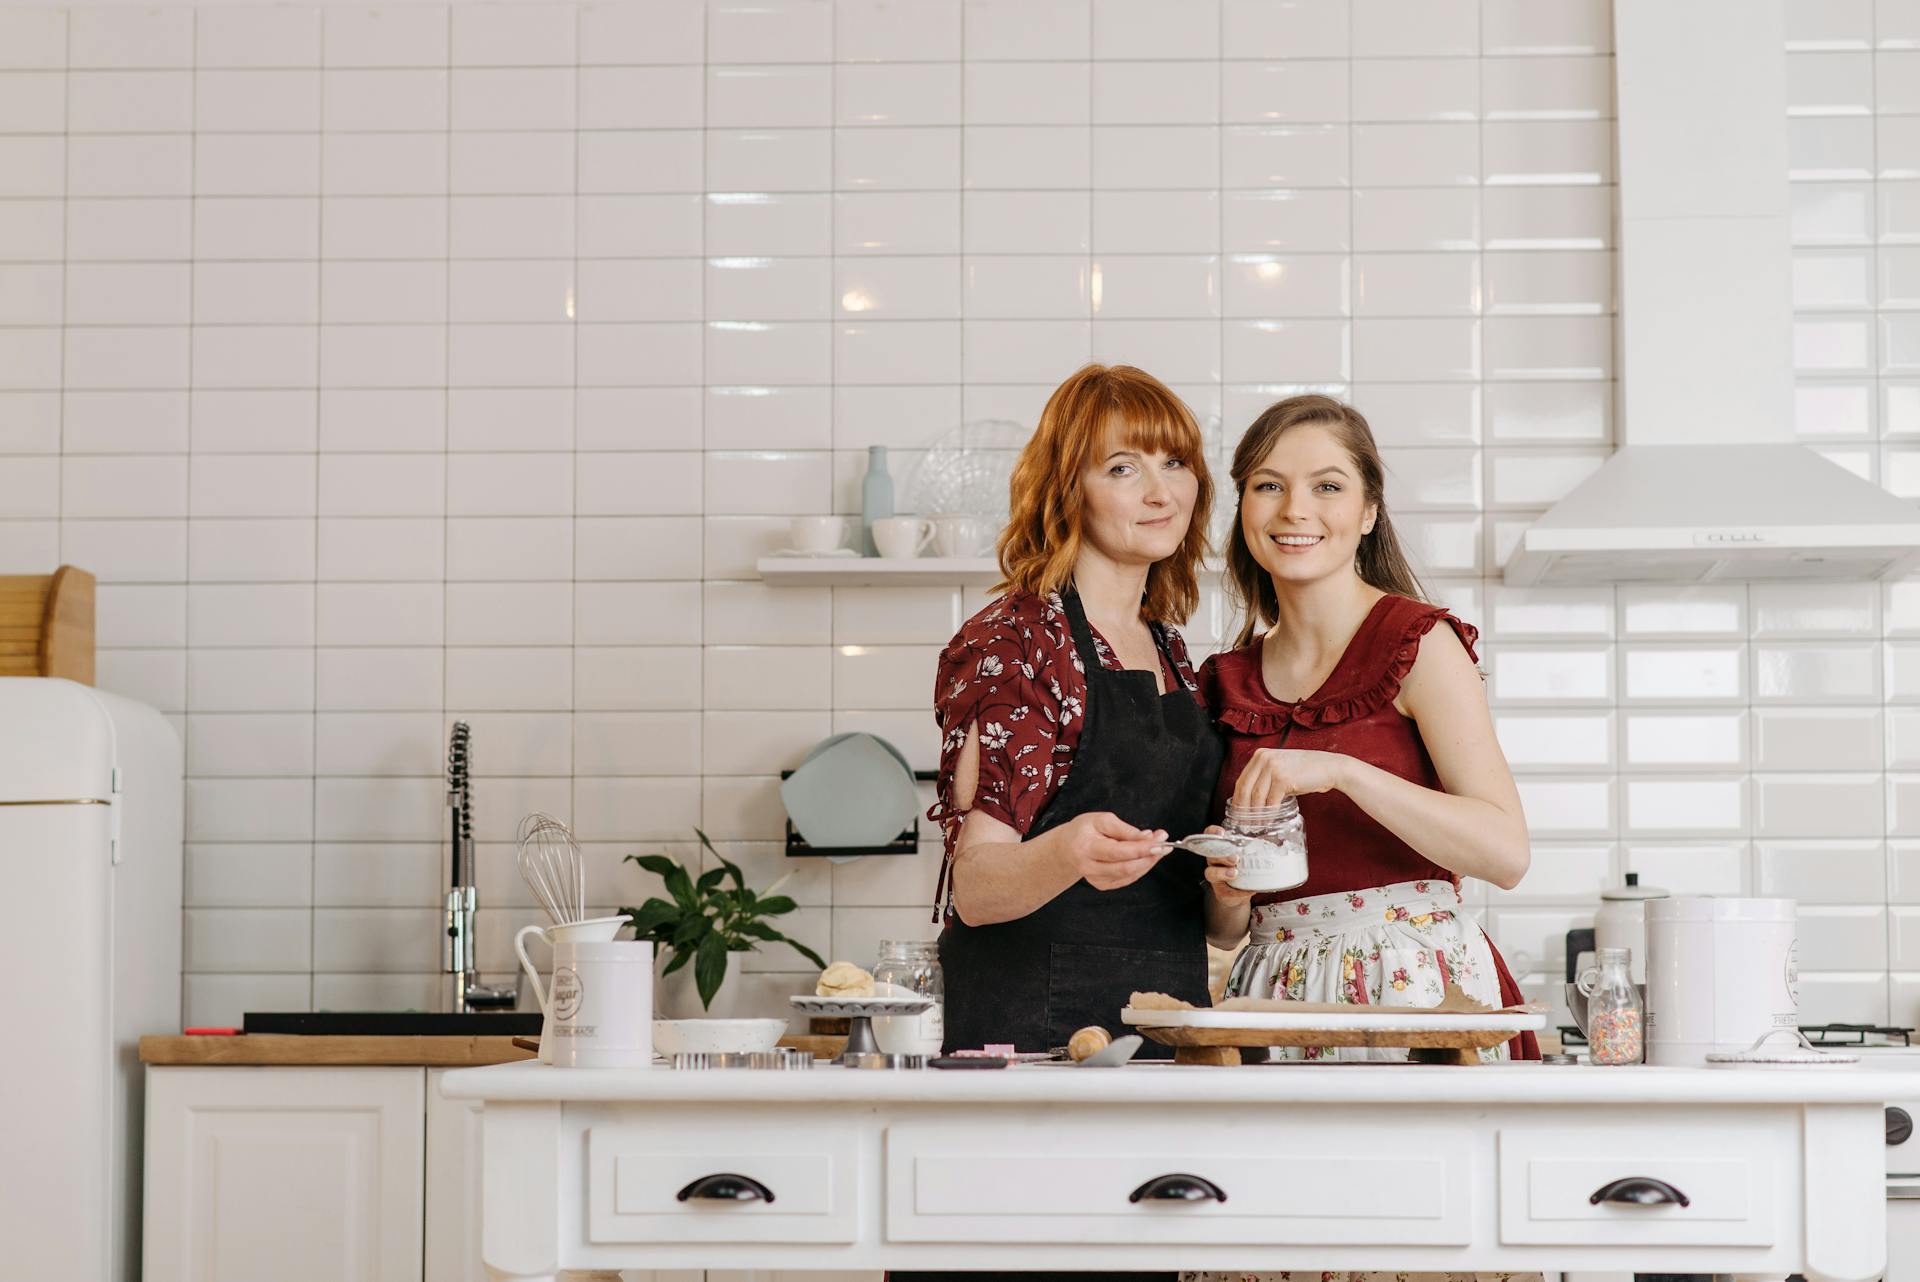 Two women cooking together | Source: Pexels